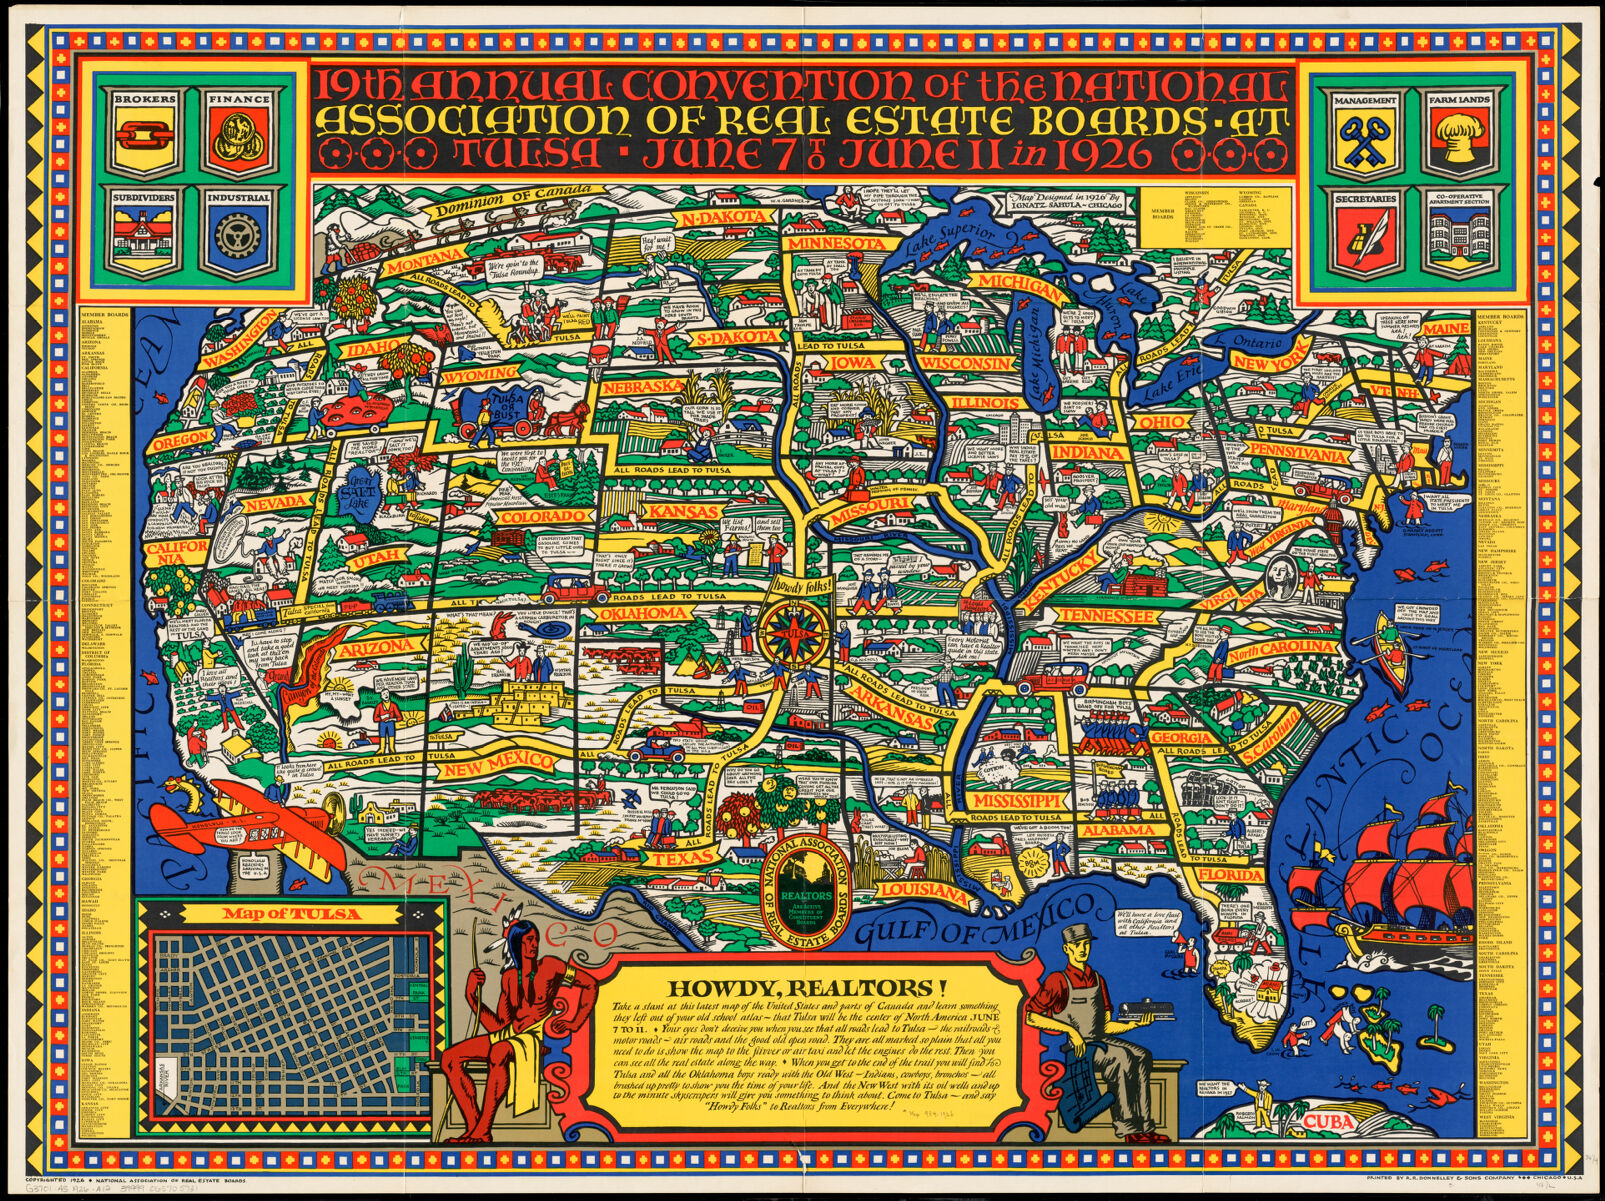 From our collections, the NAREB map: a pictorial map advertising the 19th annual convention of the National Association of Real Estate Boards.